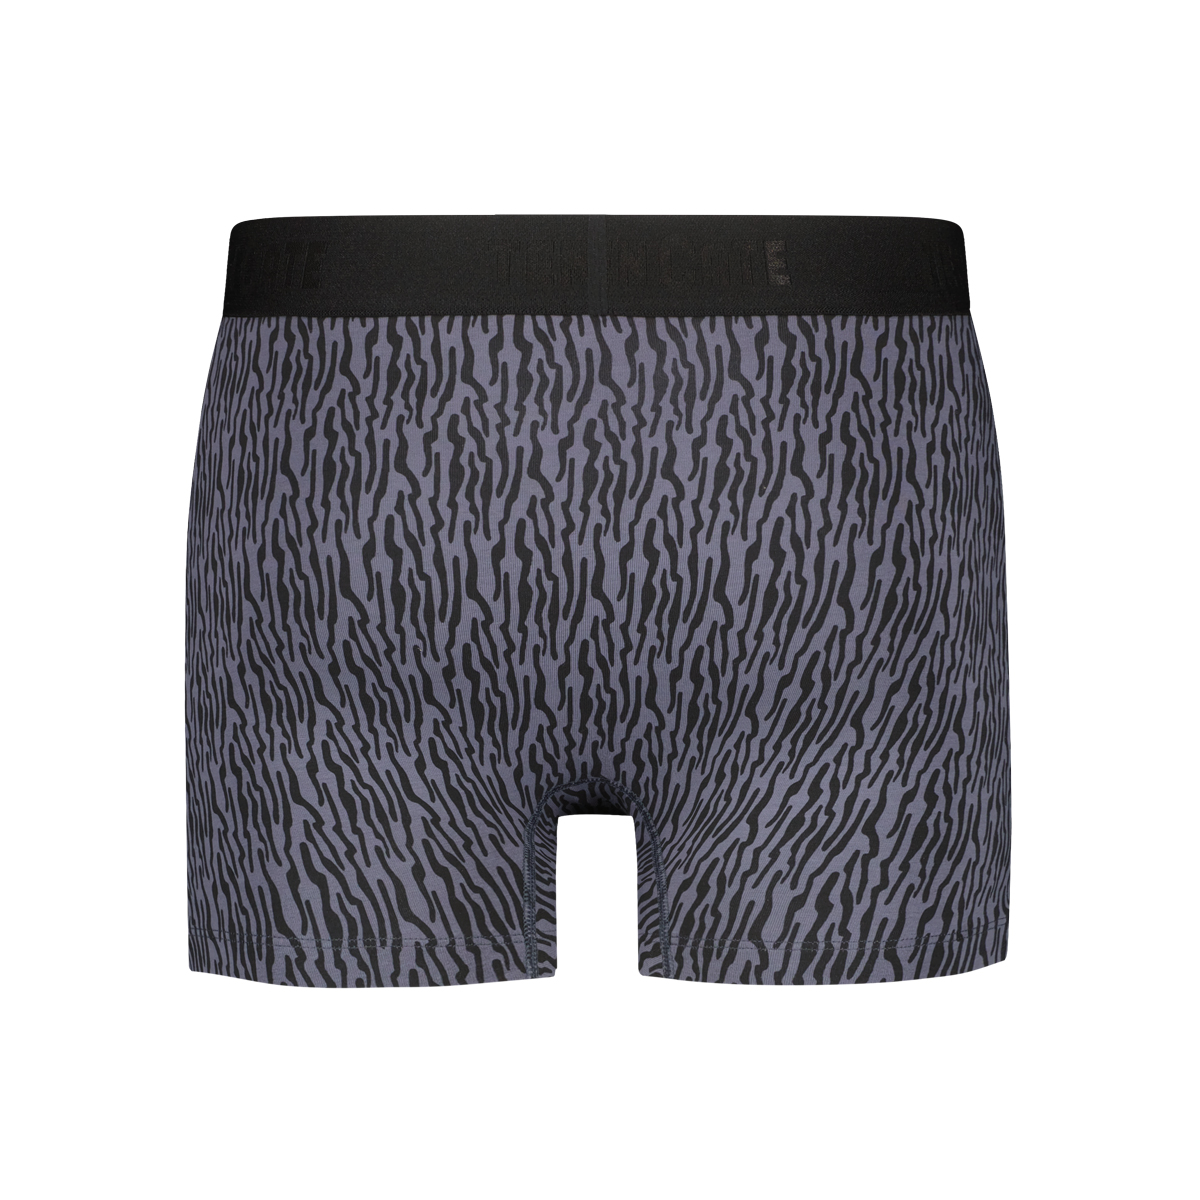 shorts cool lines grey 2 pack